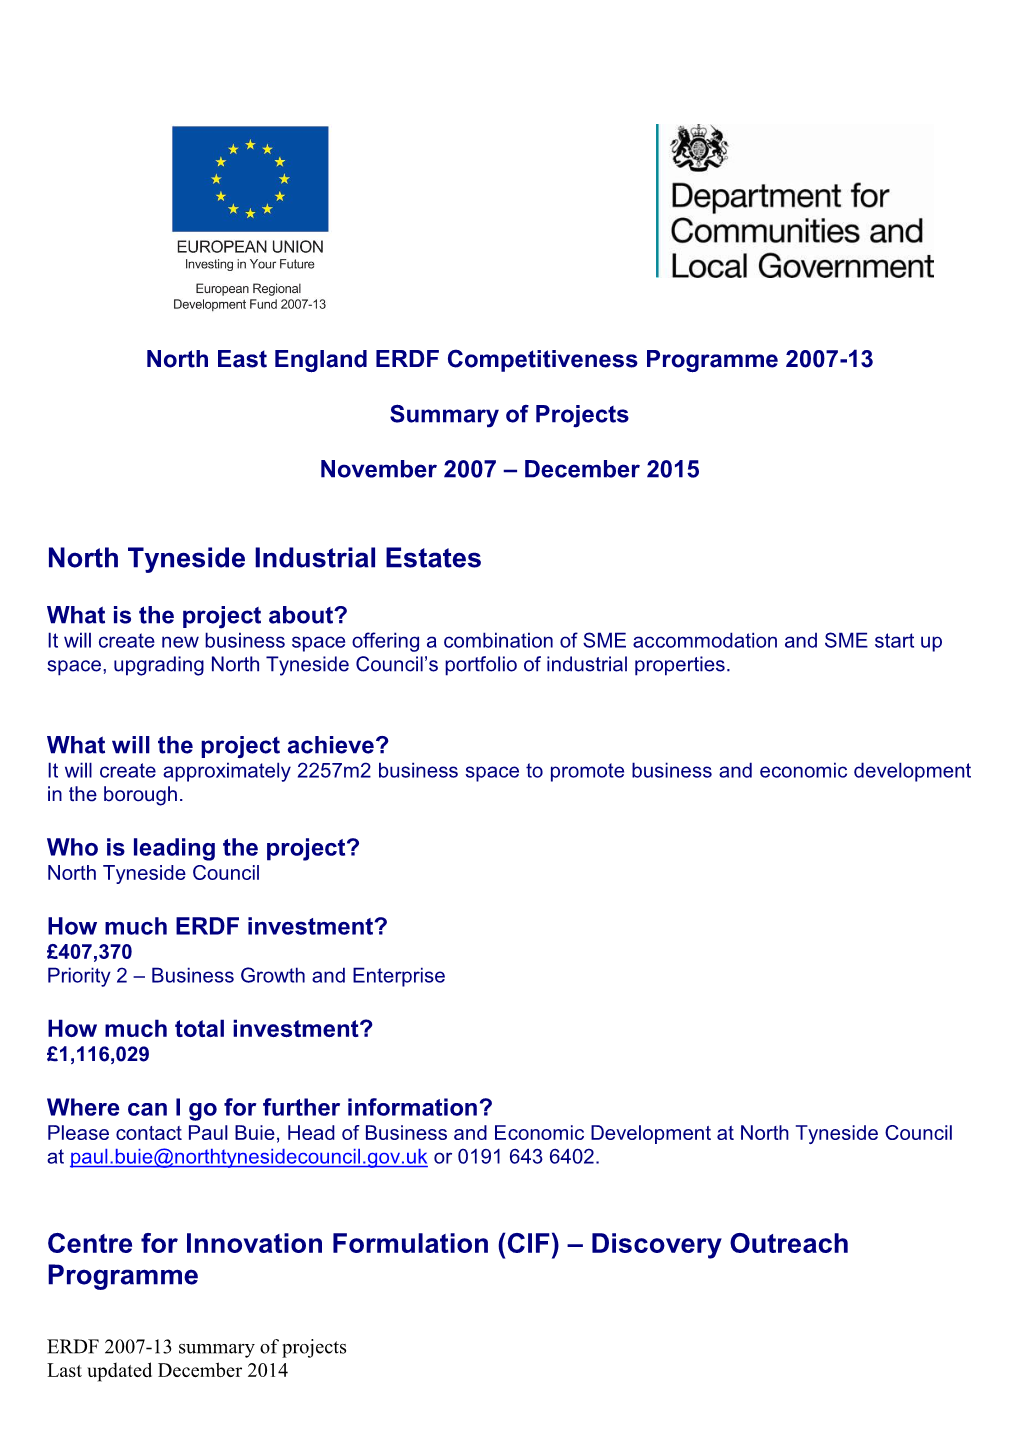 ERDF North East Summary of Projects December 2015